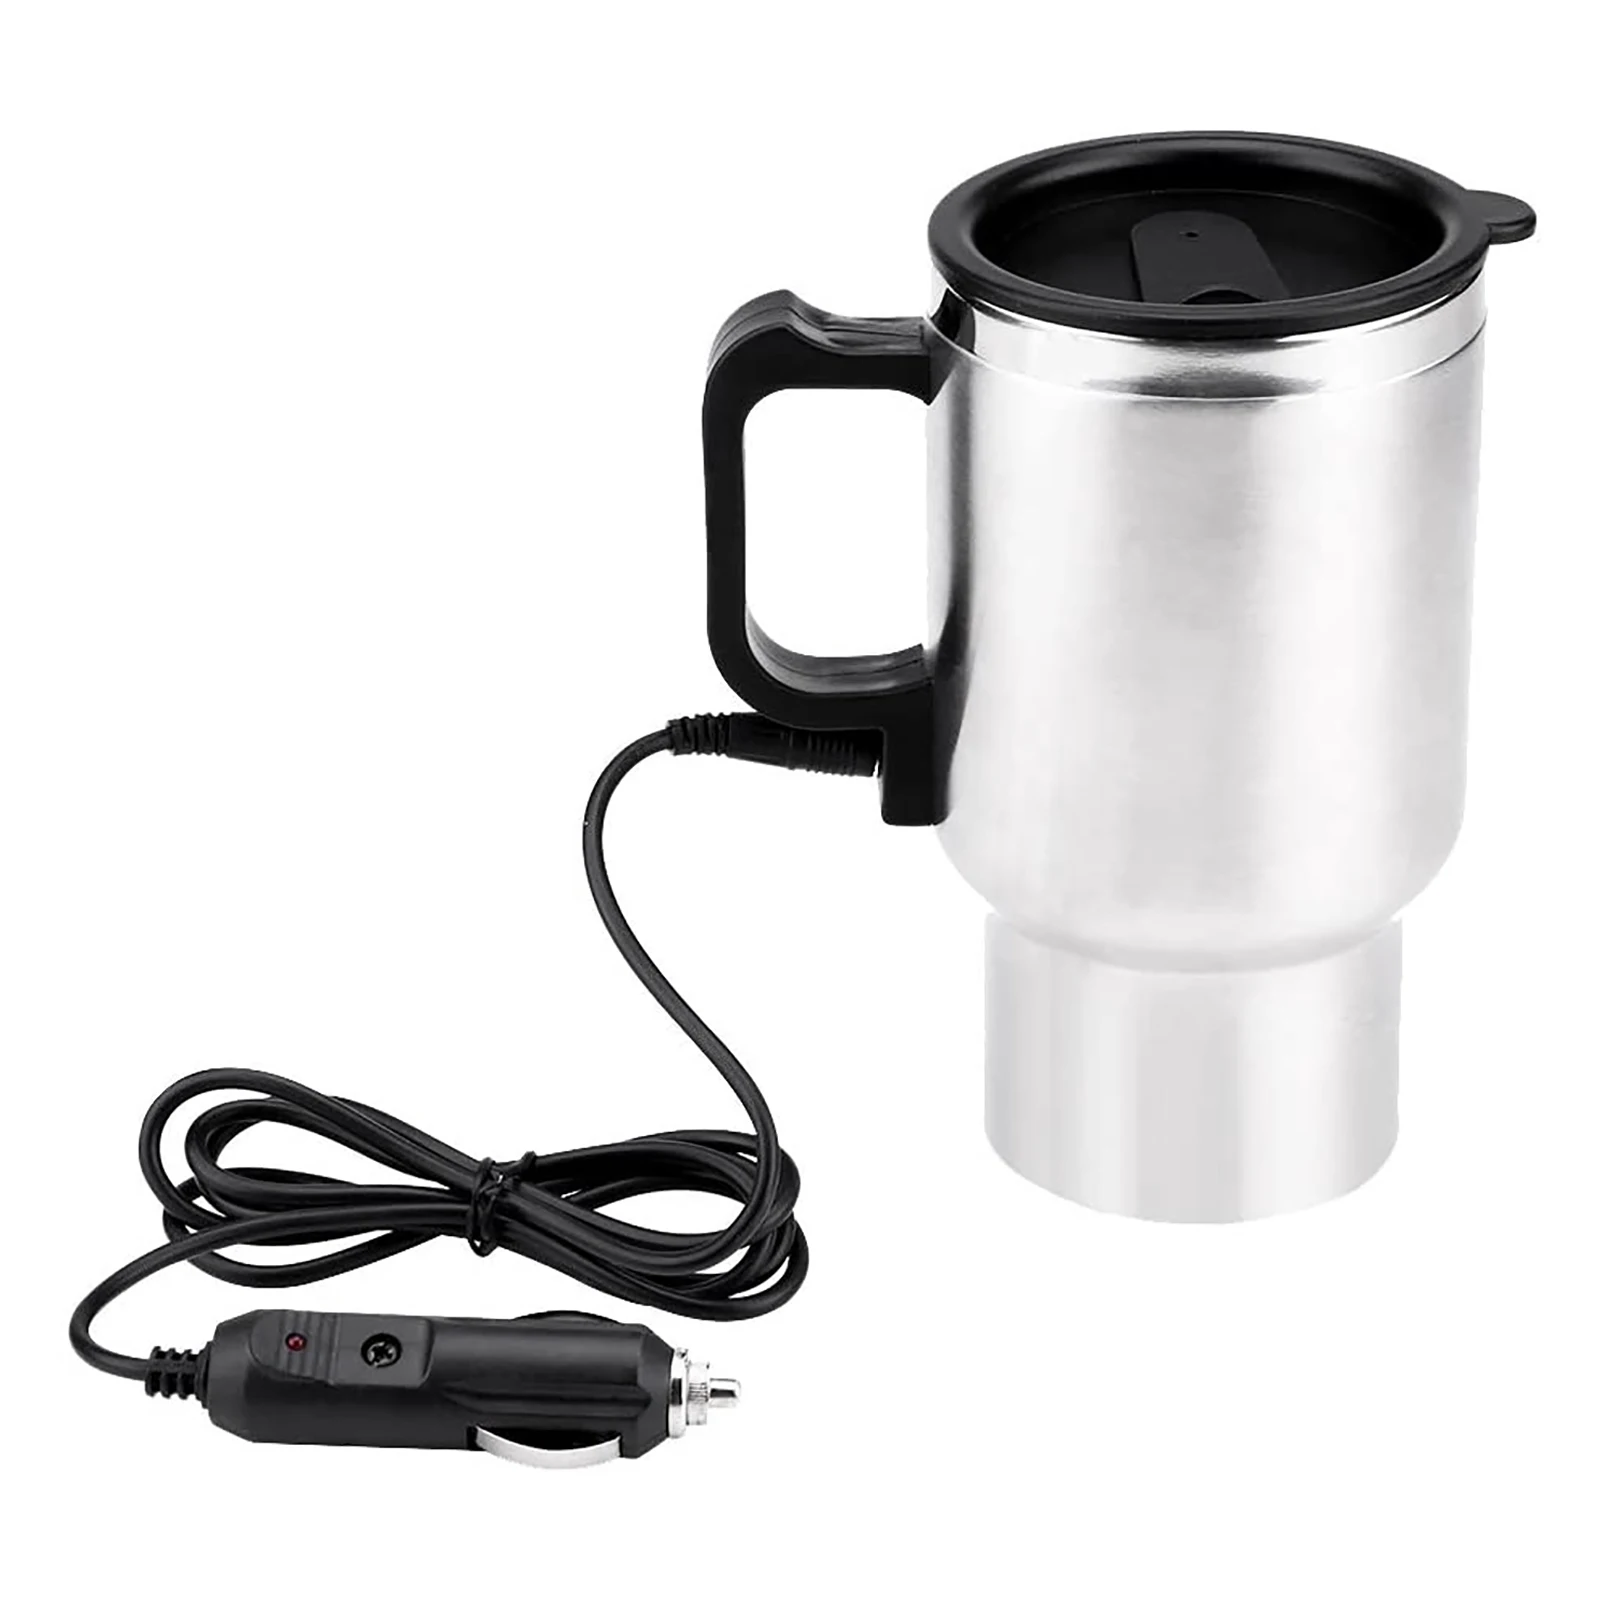 12V 450ml Vehicle Heating Cup Stainless Steel Electric Heating C